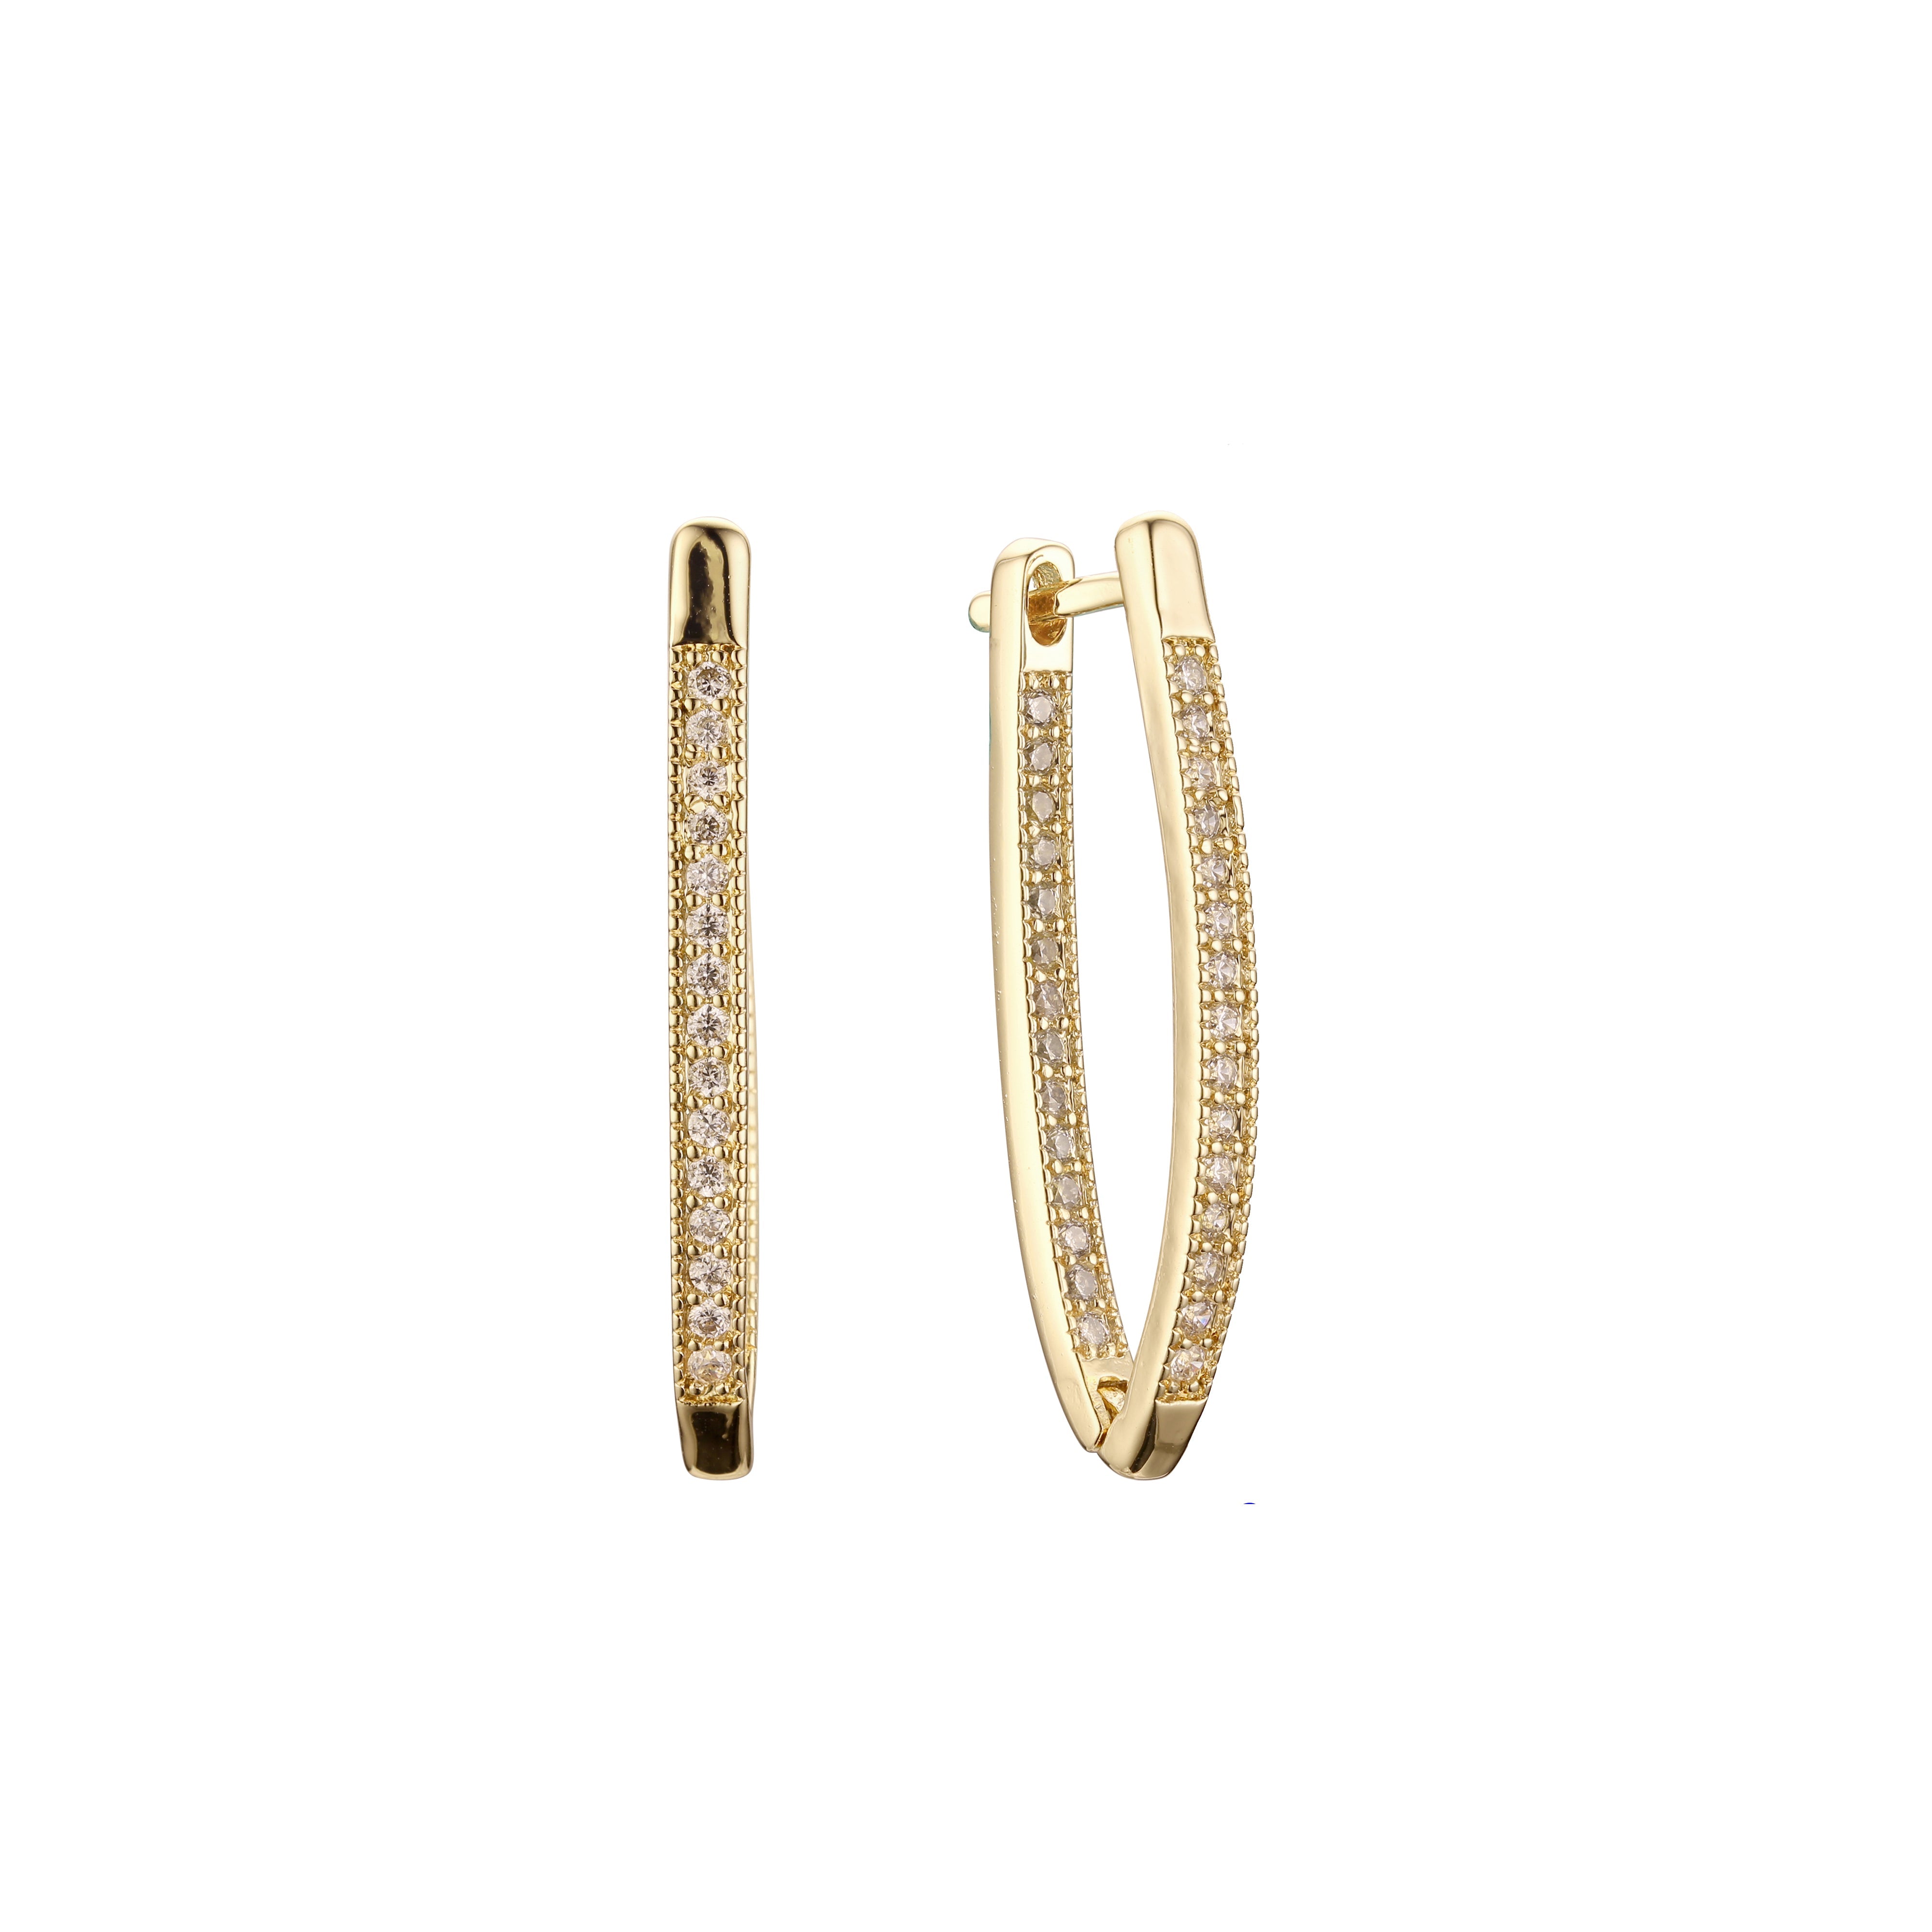 .Tall earrings in 14K Gold, White Gold, Rose Gold plating colors